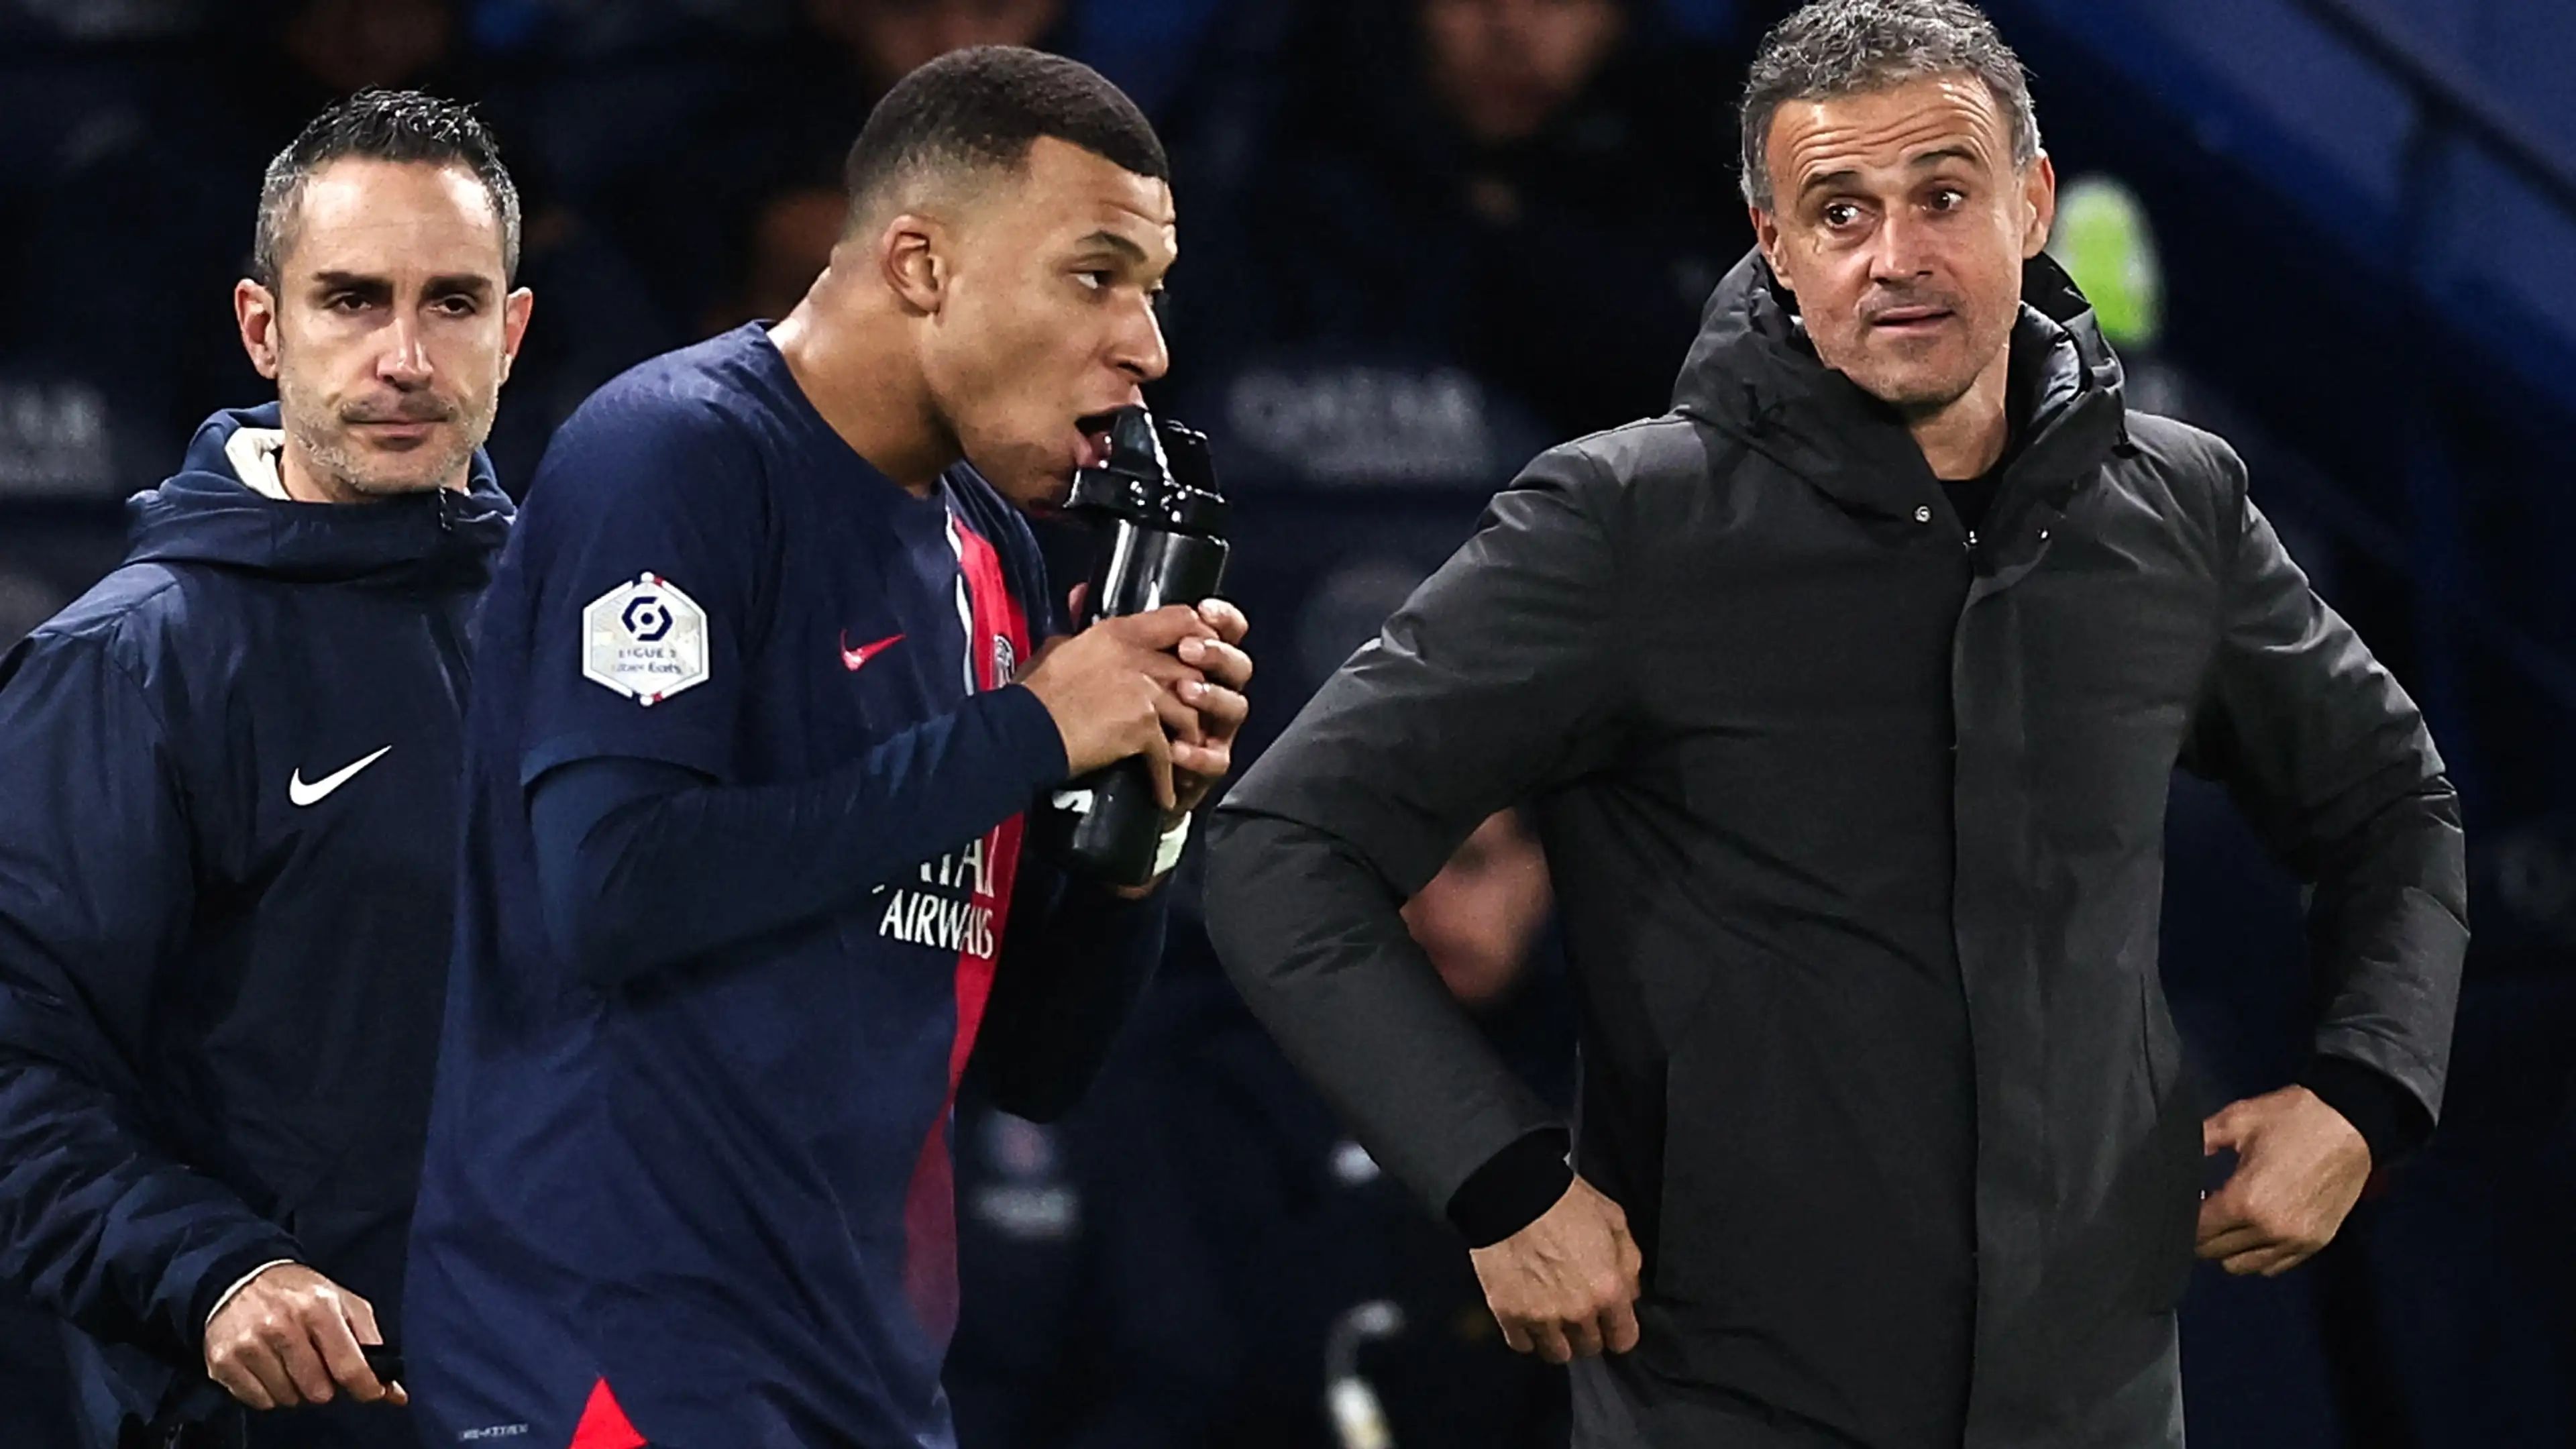 Barcelona players went after Kylian Mbappe in tunnel after Paris Saint-Germain defeat